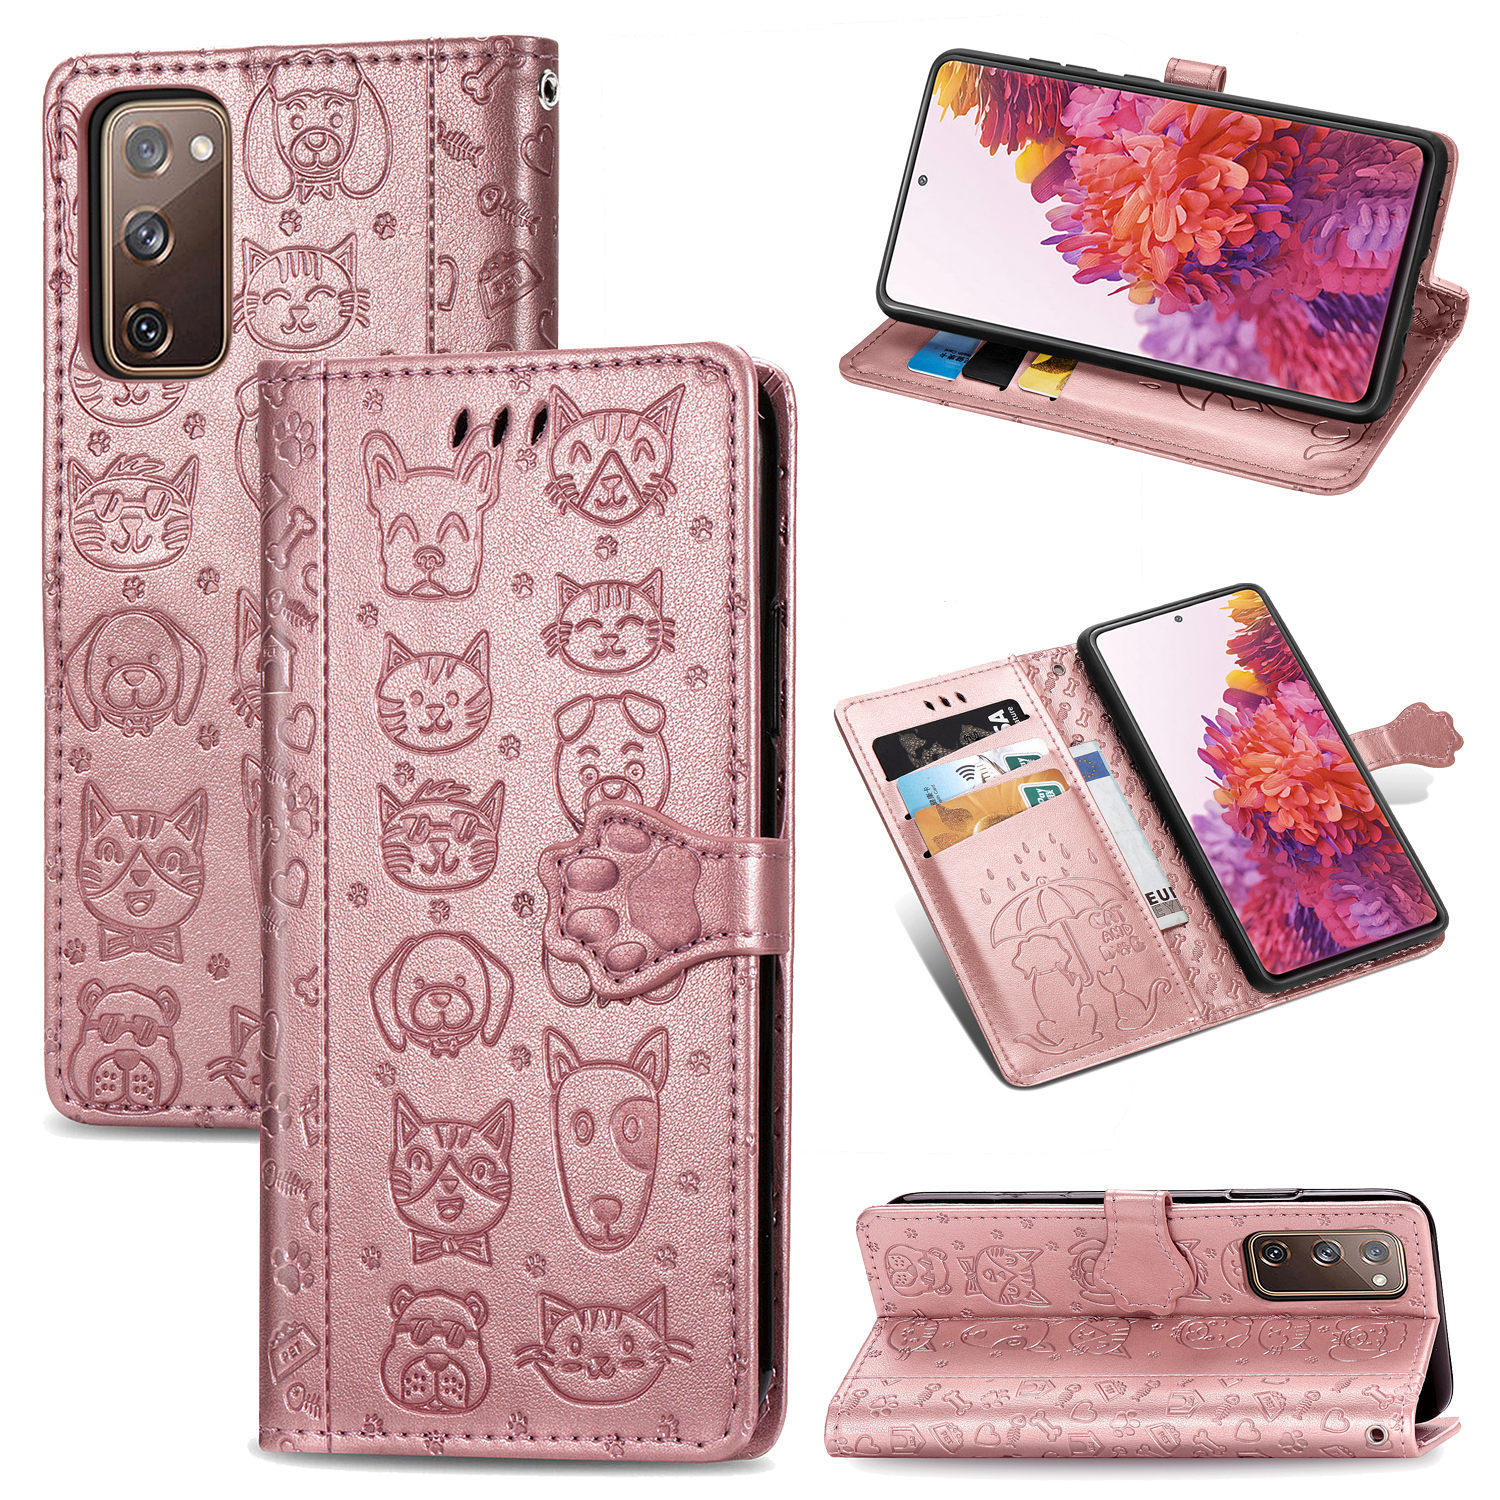 for Samsung Galaxy S20 FE 5G/S20 FE/S20 Lite Handmade 3D Bling Diamond Butterfly Flowers PU Leather Stand Flip Folio Phone Cover With Stylus Pen Hand Strap Galaxy S20 FE Wallet Case Card Holder Screen Protector Grey 